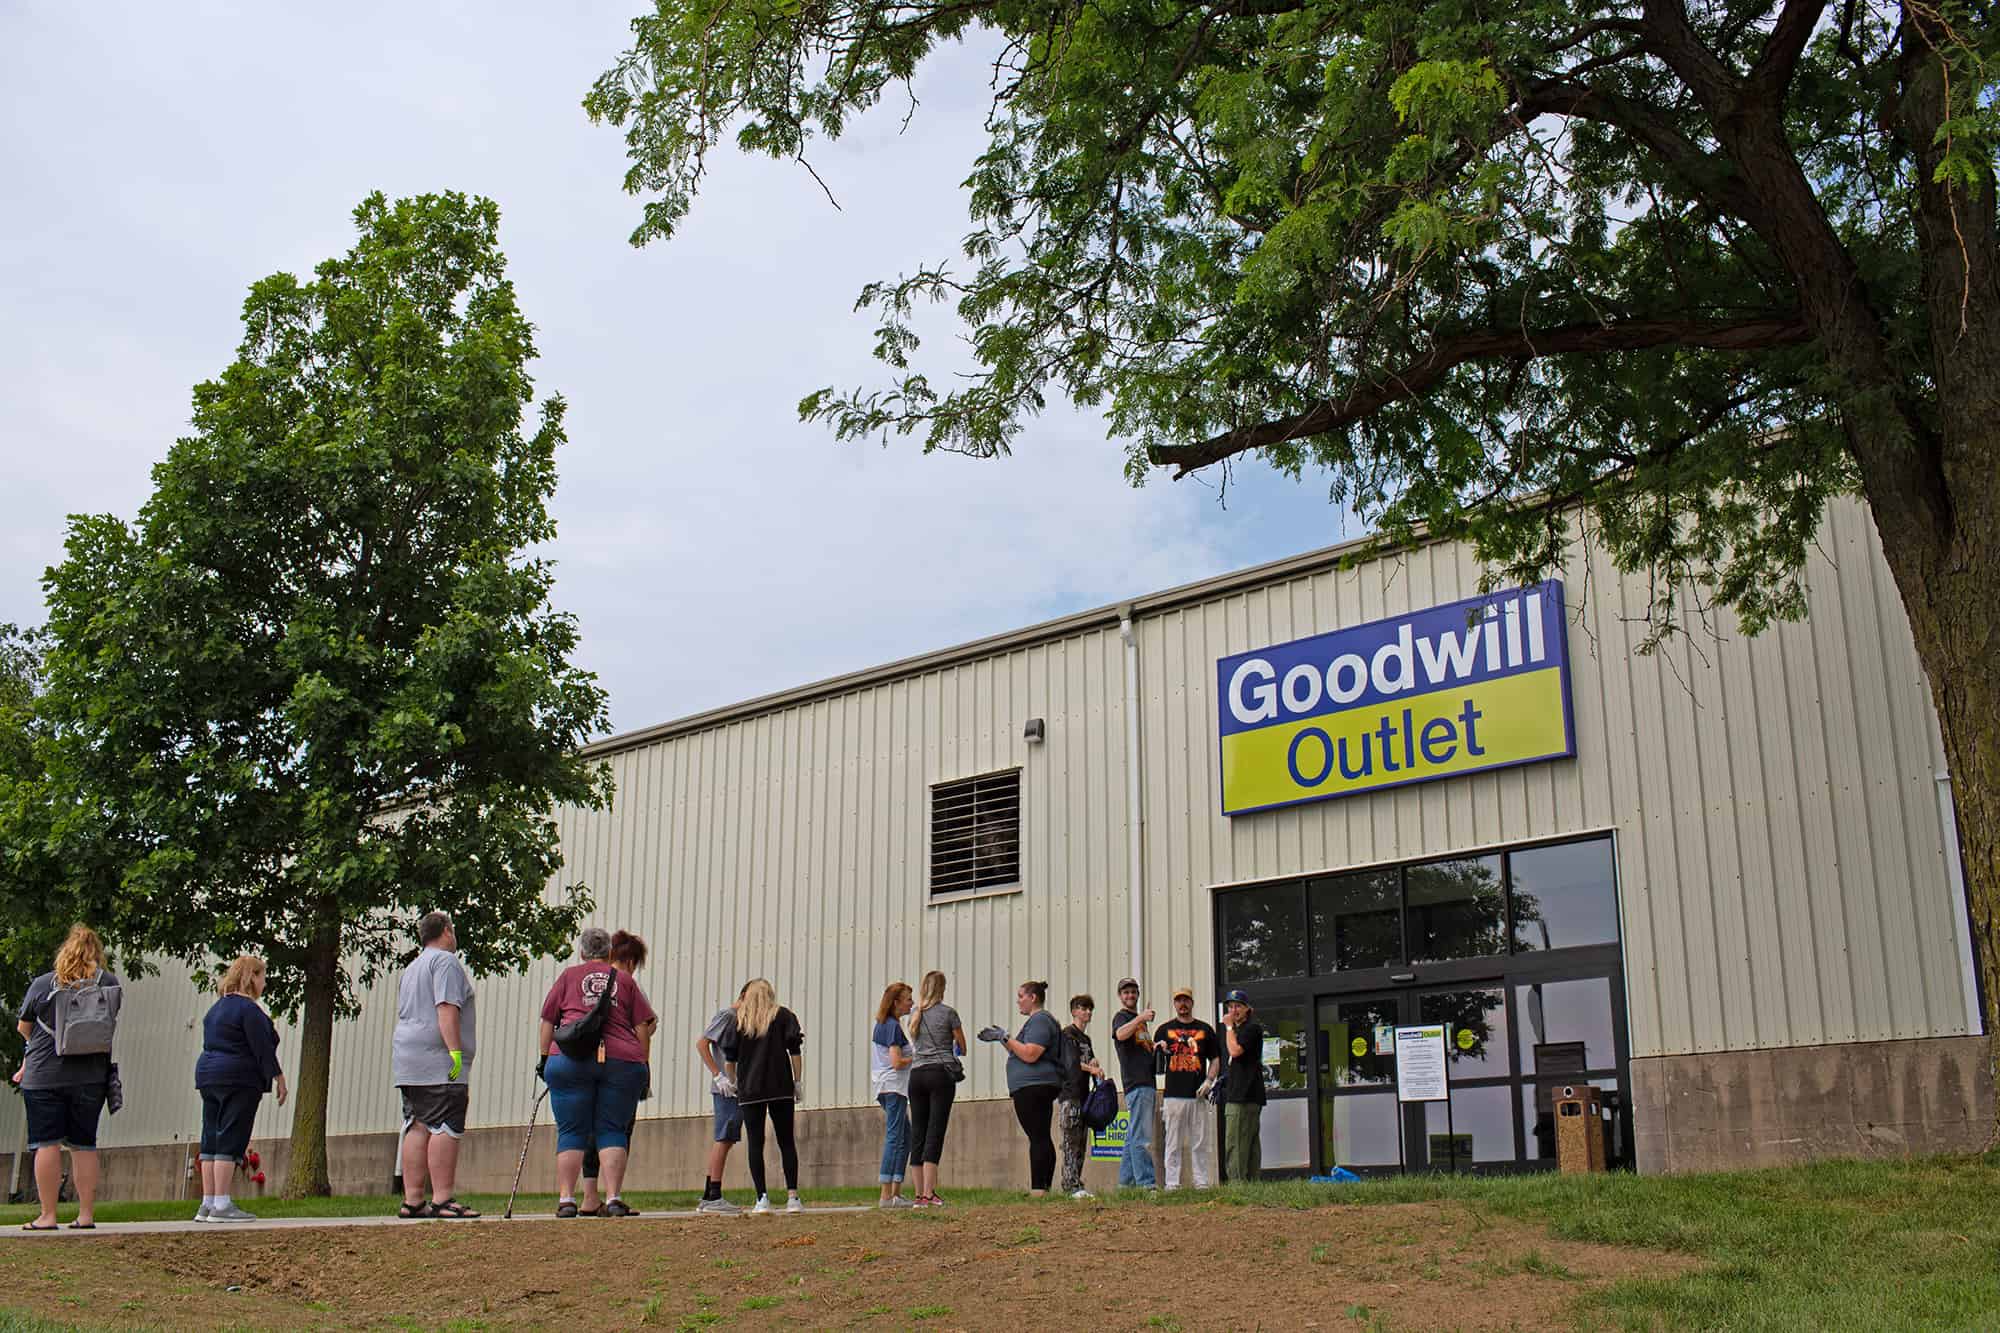 Exterior view of the Goodwill Outlet Store in Cedar Rapids, Iowa.